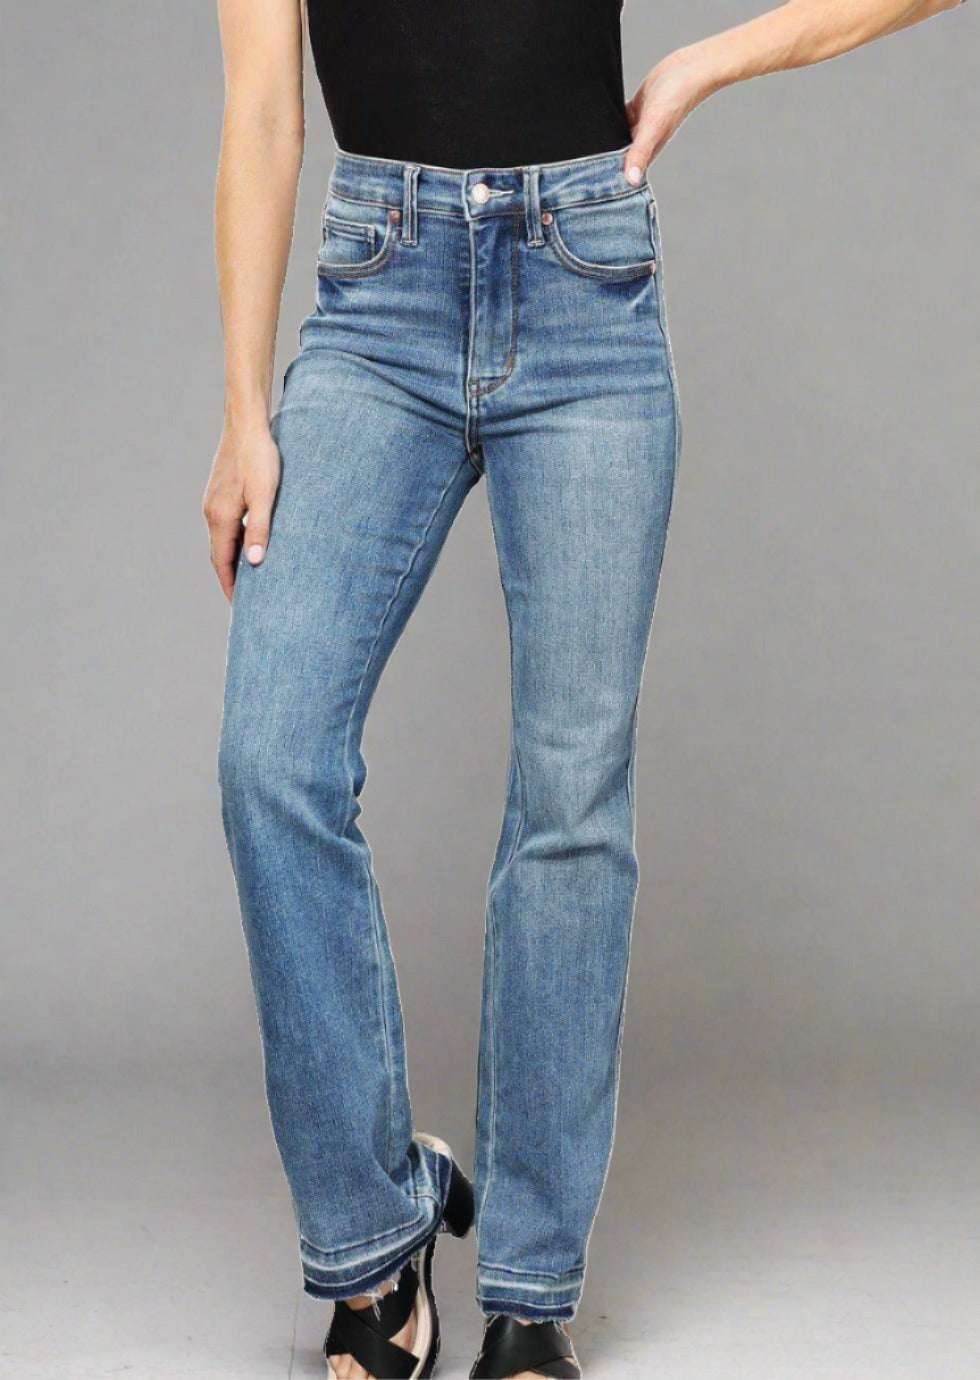 Judy Blue High Waist Jeans with Pockets - Trendociti